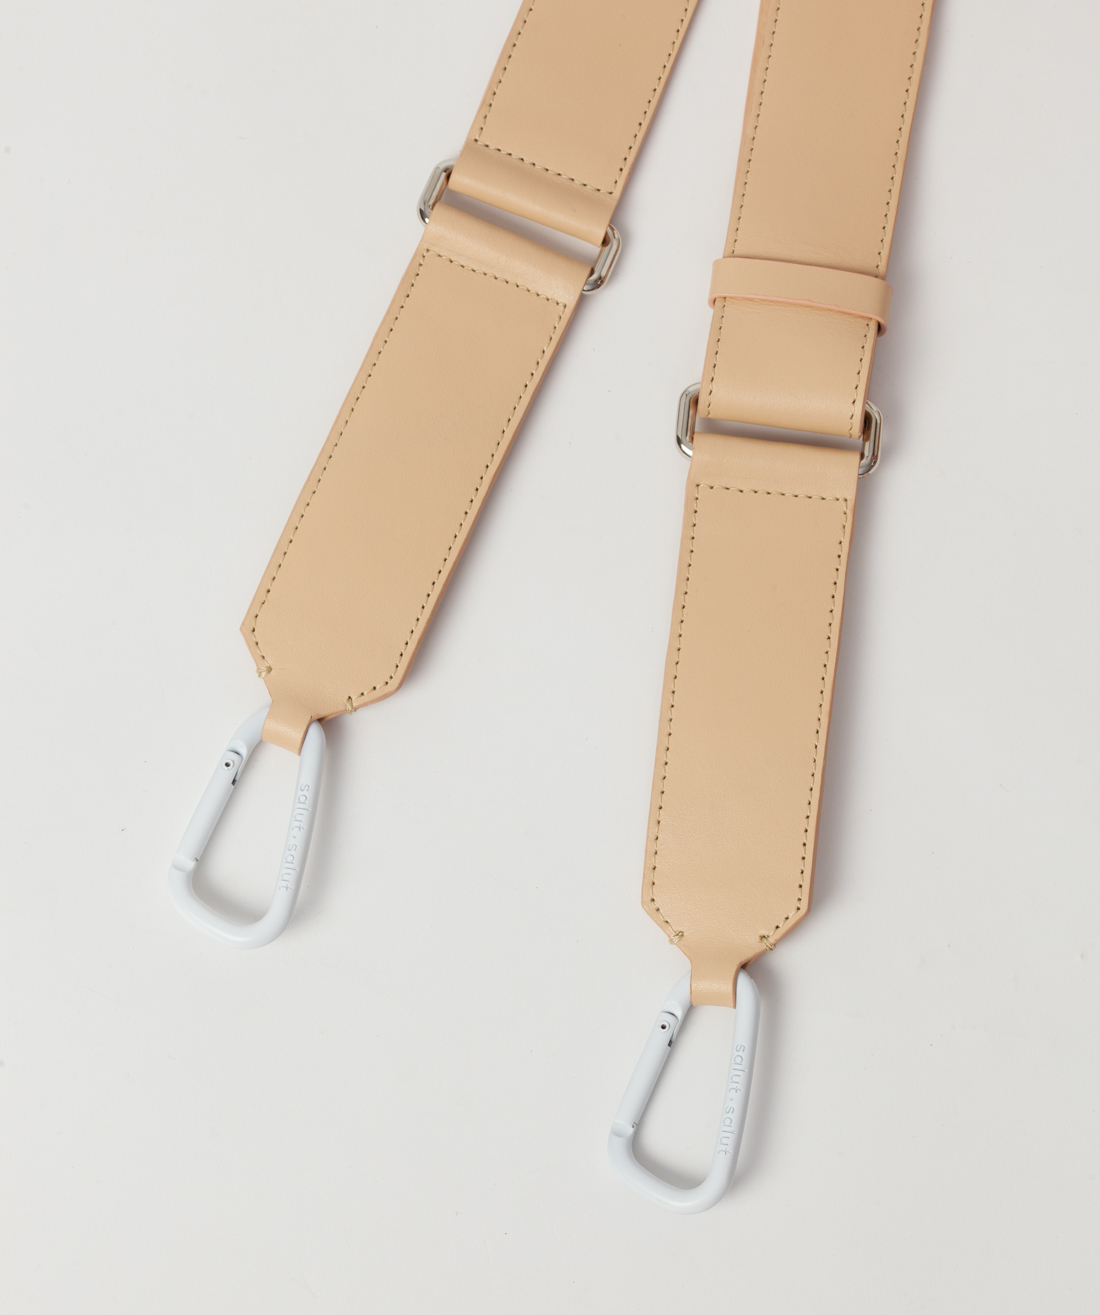 Wide leather strap - NUDE LEATHER